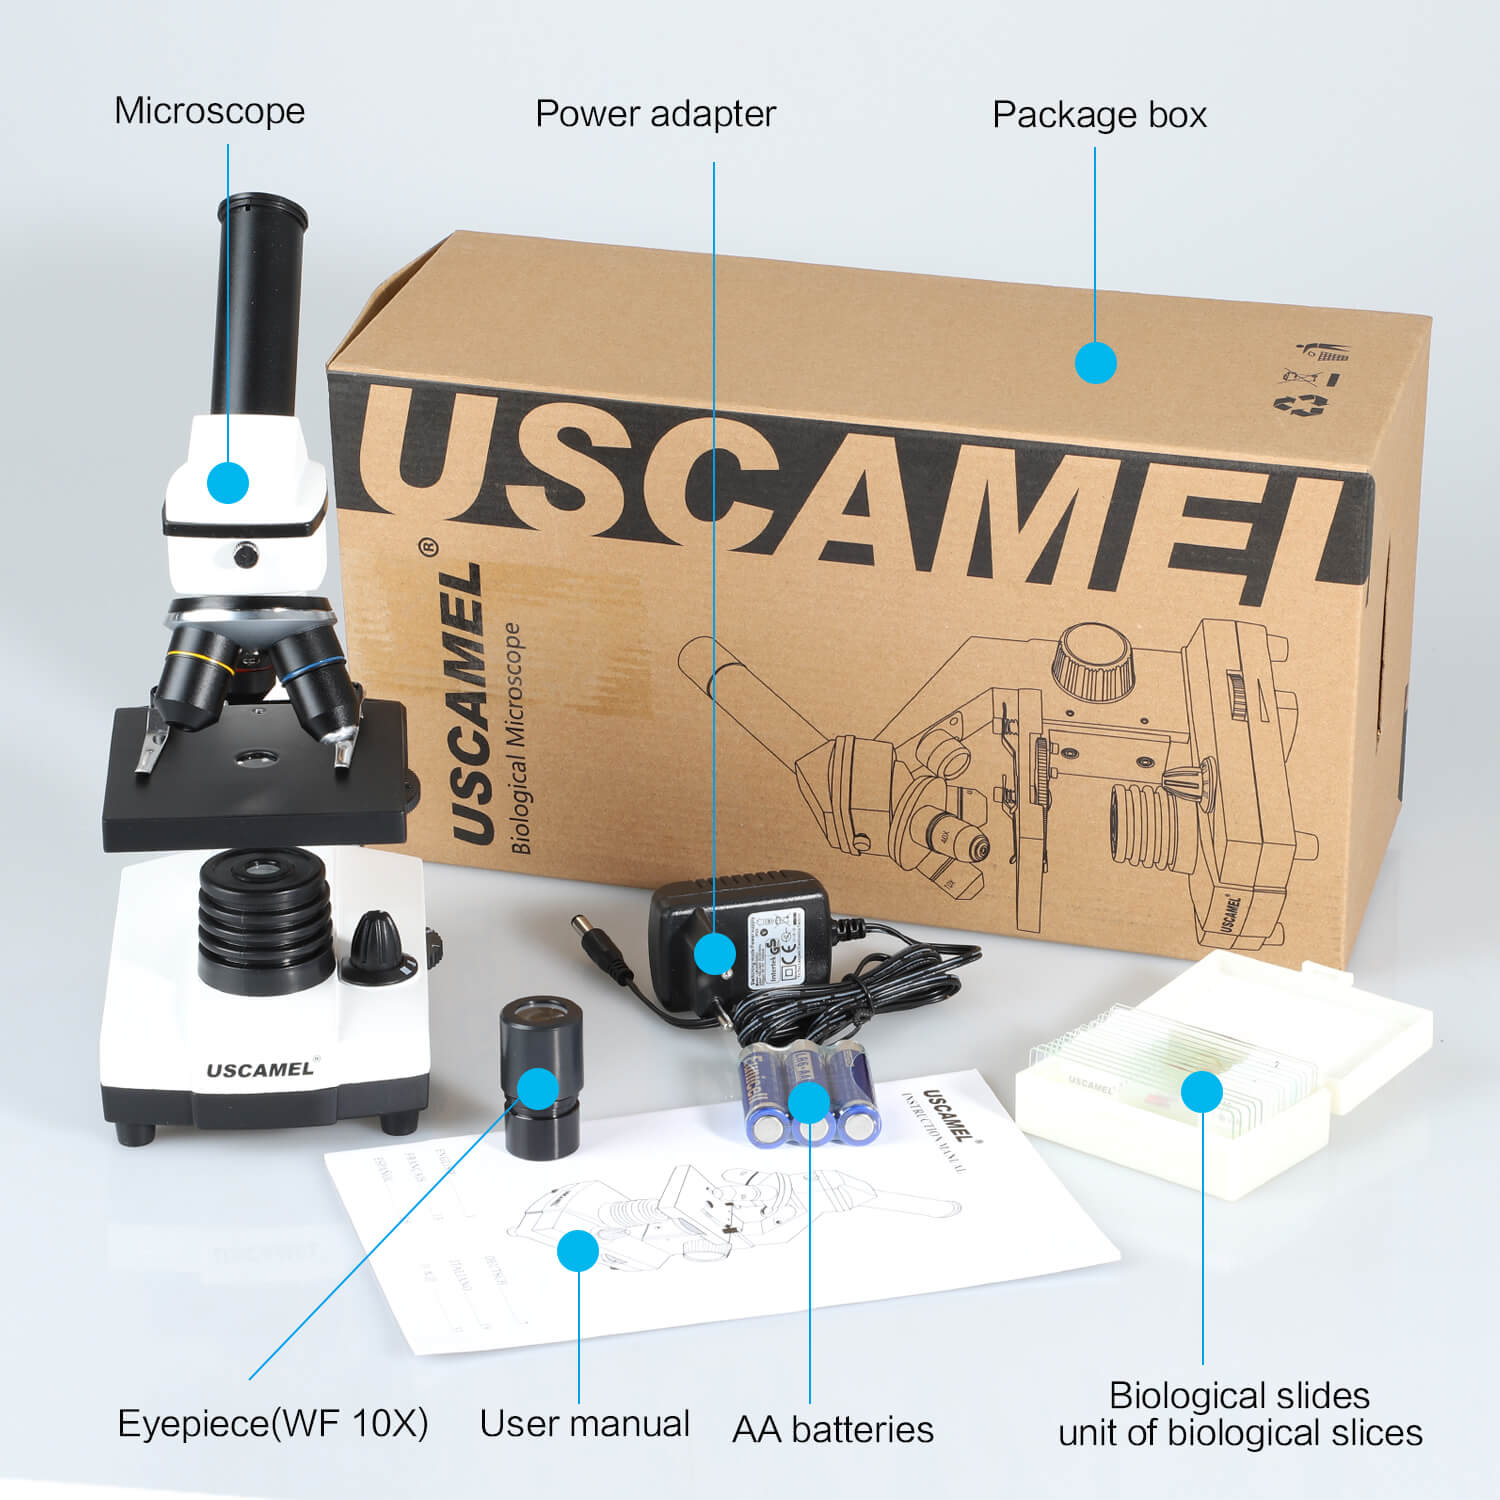 ux001 package includes 1x main product, power adapter, 10x eyepieces, user manual, 3x AA batteries, slides set